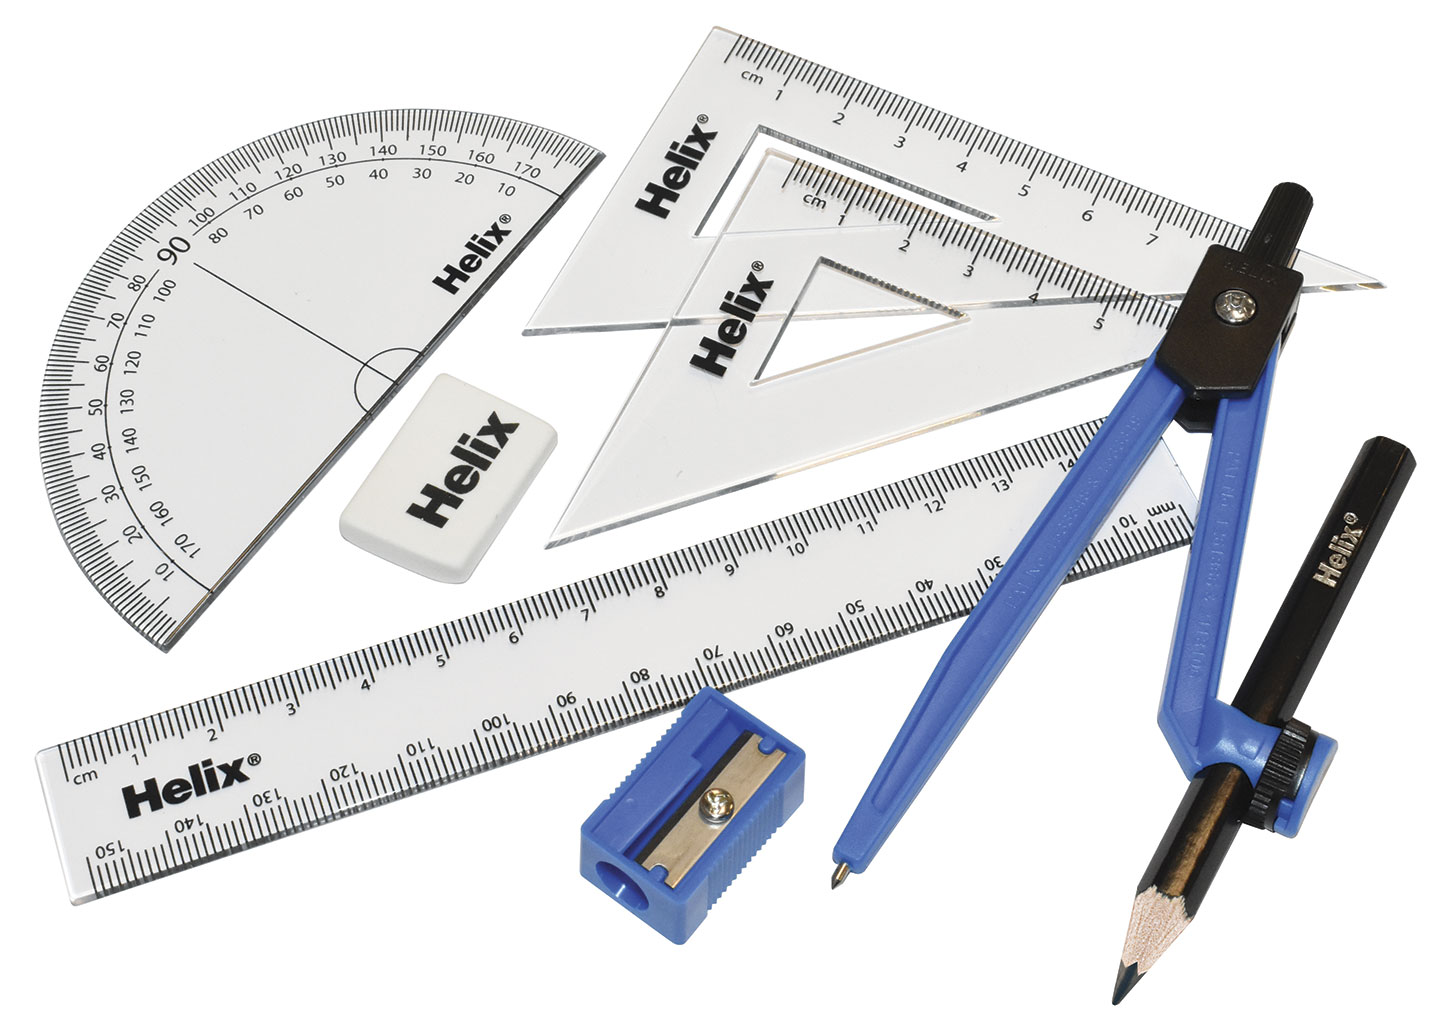 Helix compact maths set out of packaging